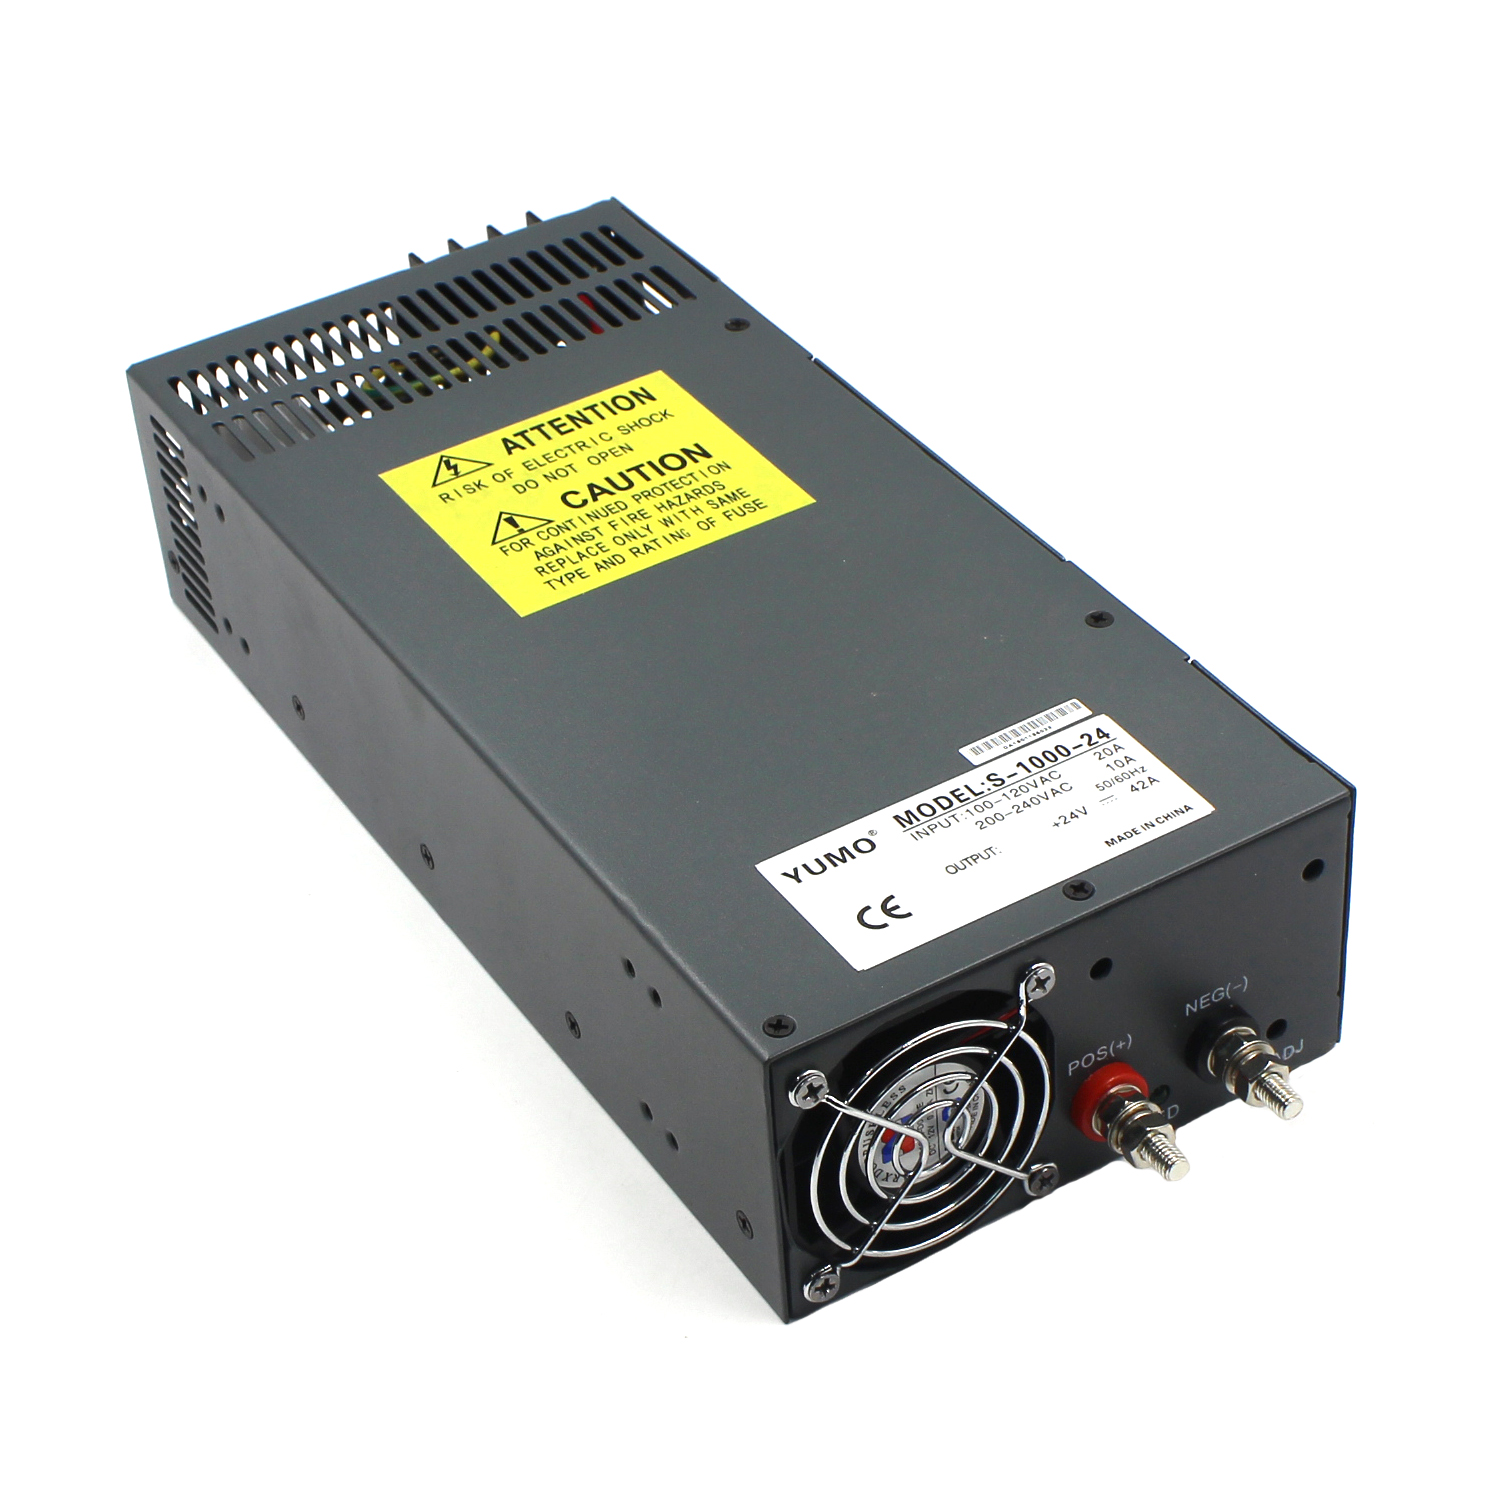 S-1000-24 High Quality 1000W 24VDC SMPS Switching Power Supply